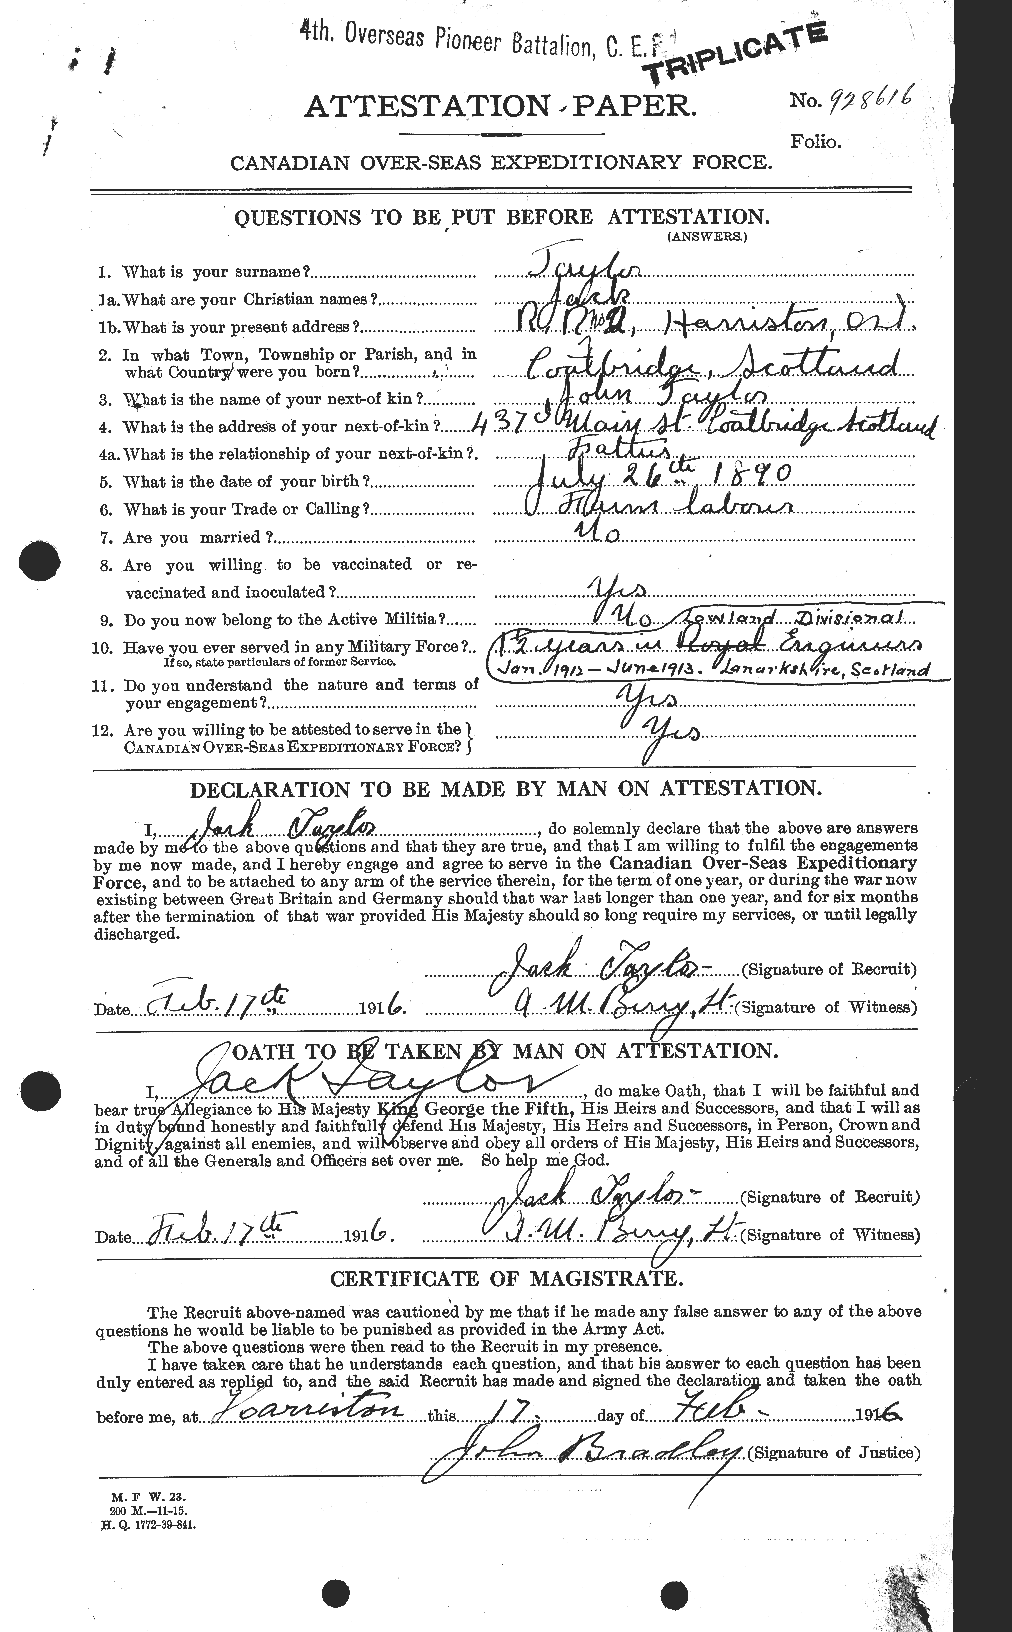 Personnel Records of the First World War - CEF 626642a